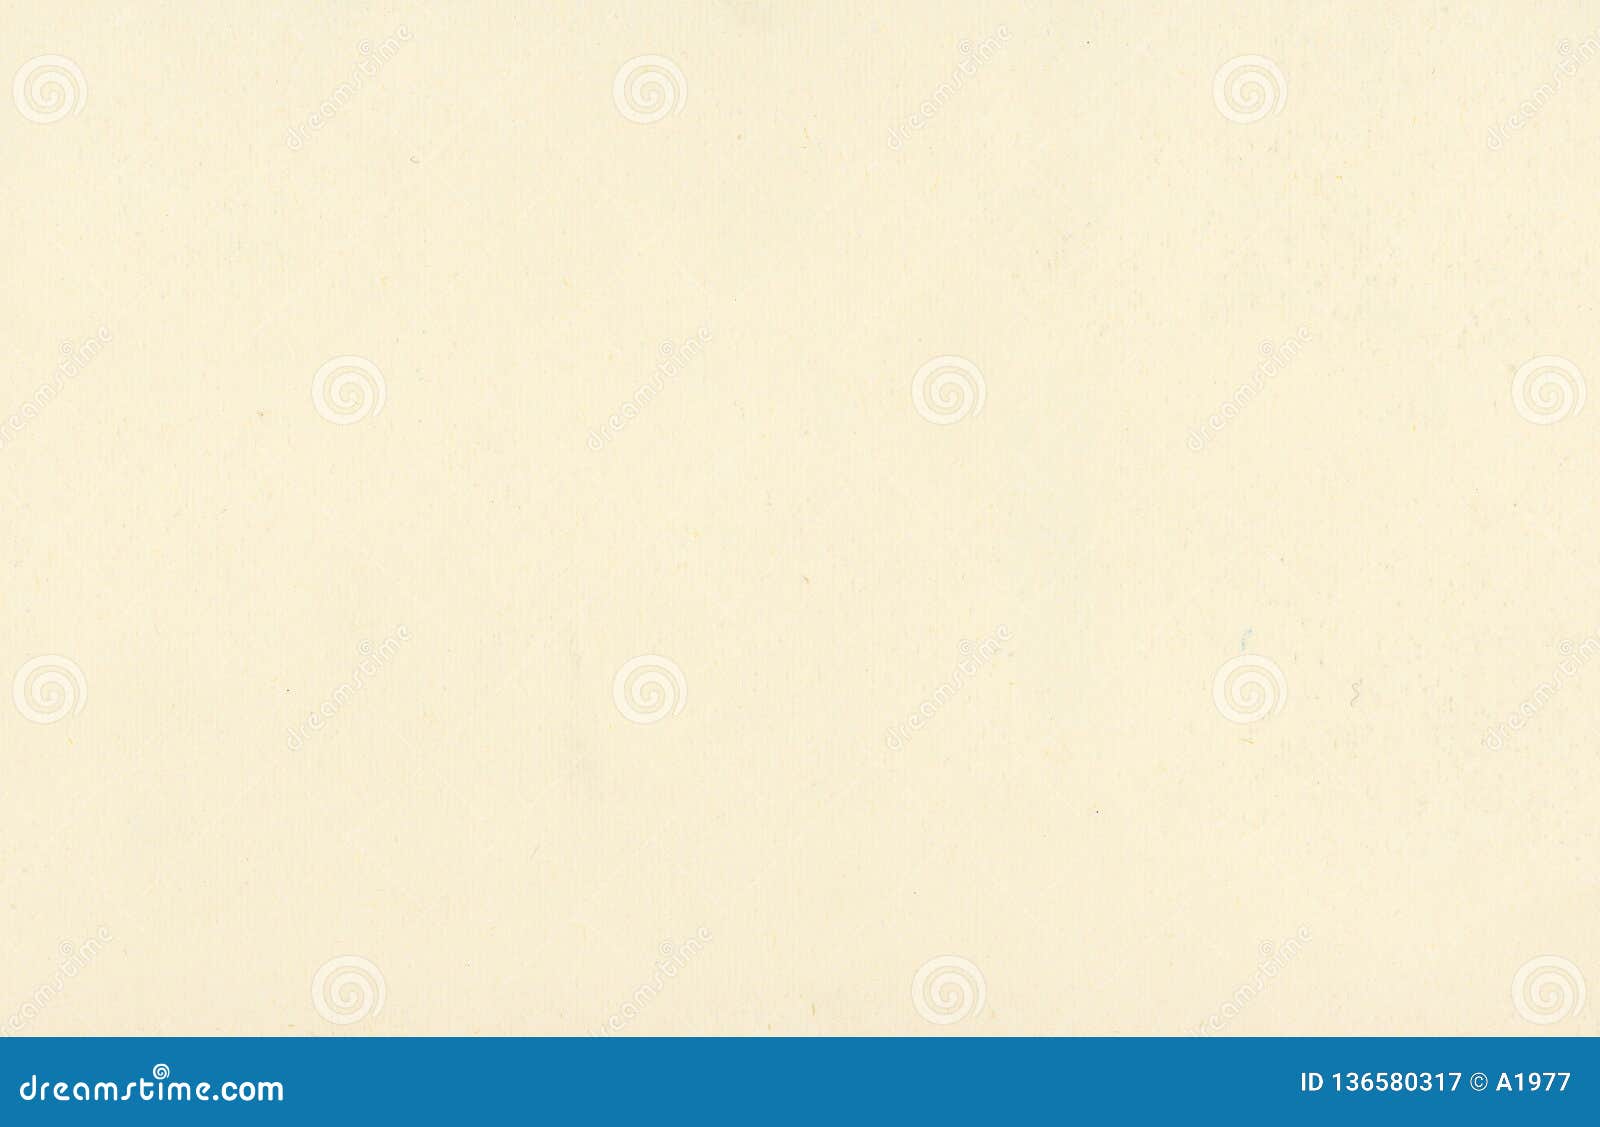 off white rimmed paper texture background